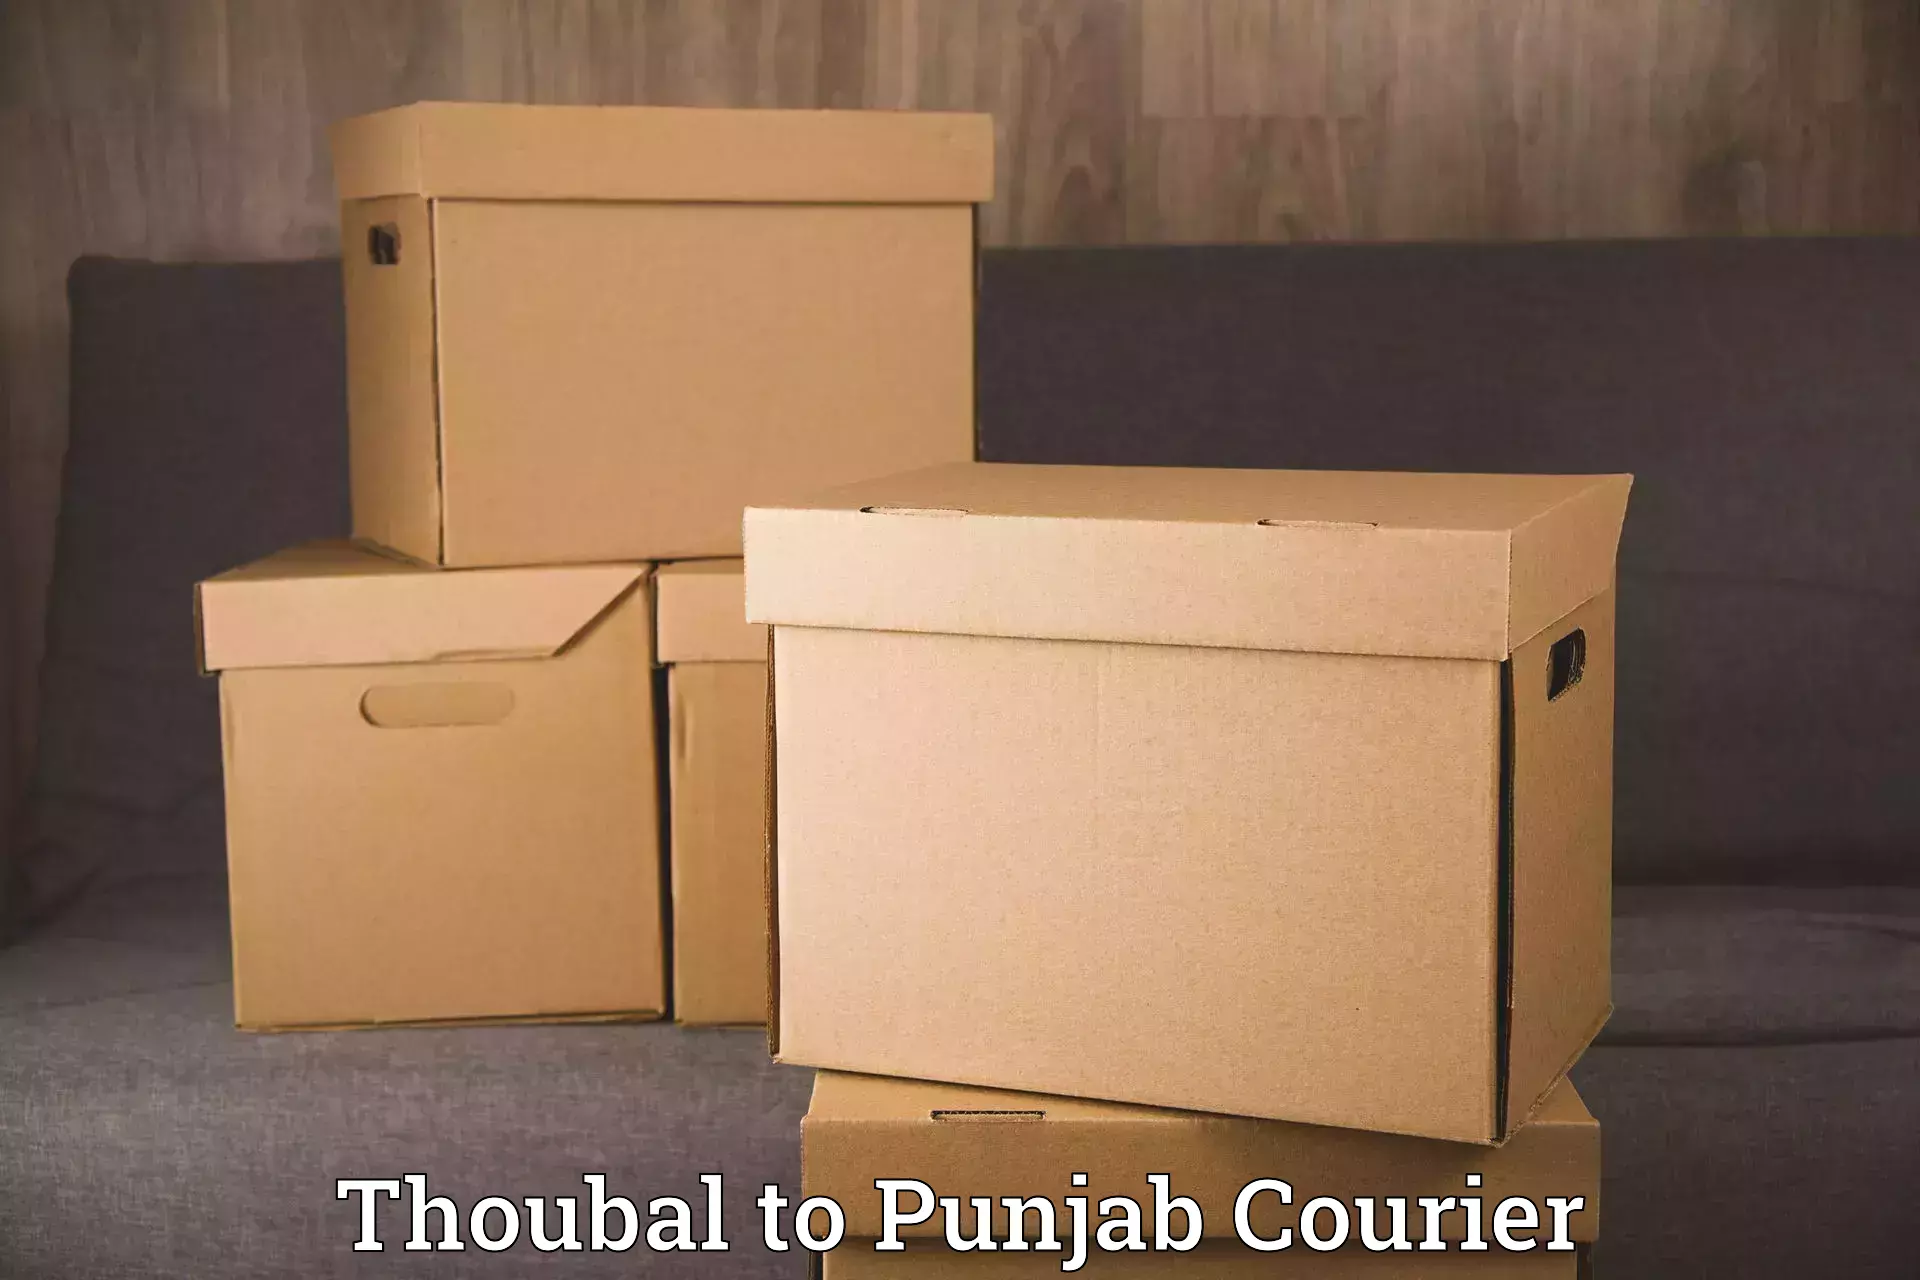 Household moving experts Thoubal to Mohali